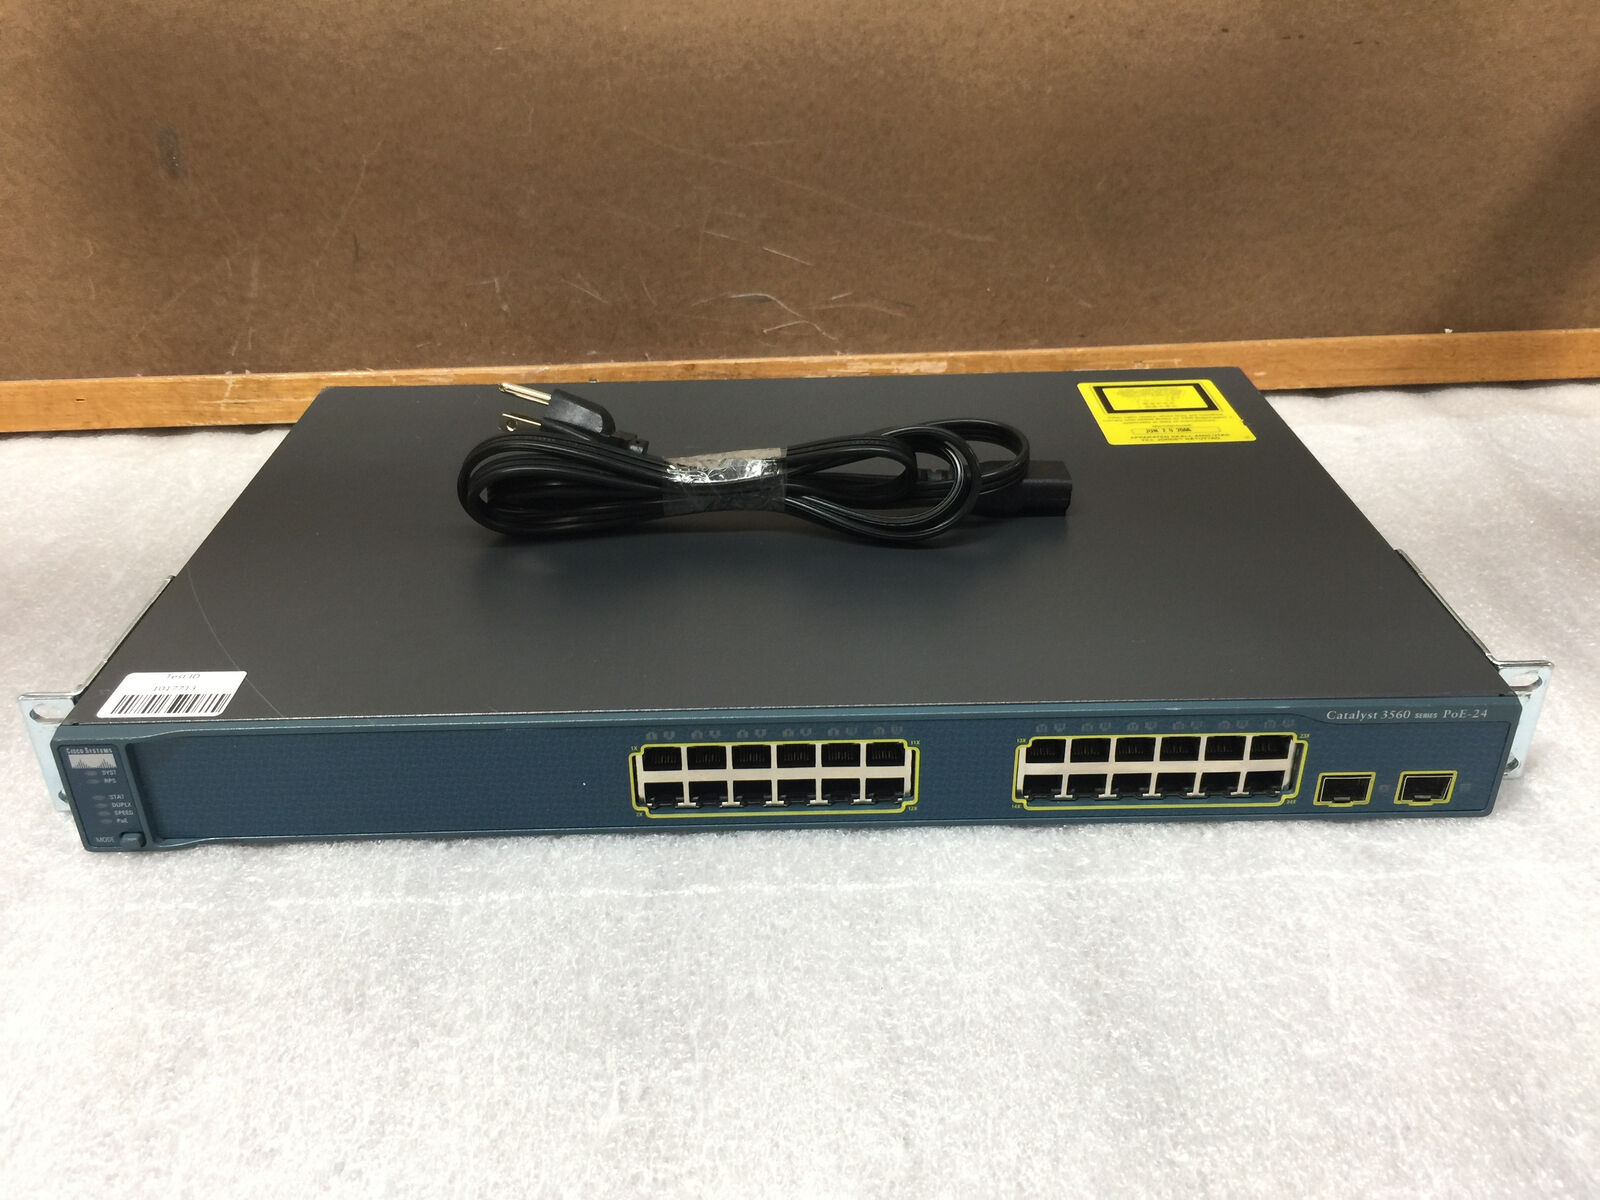 Cisco WS-C3560-24PS-S V06 Catalyst 3560 Series PoE-24 Ethernet Network Switch